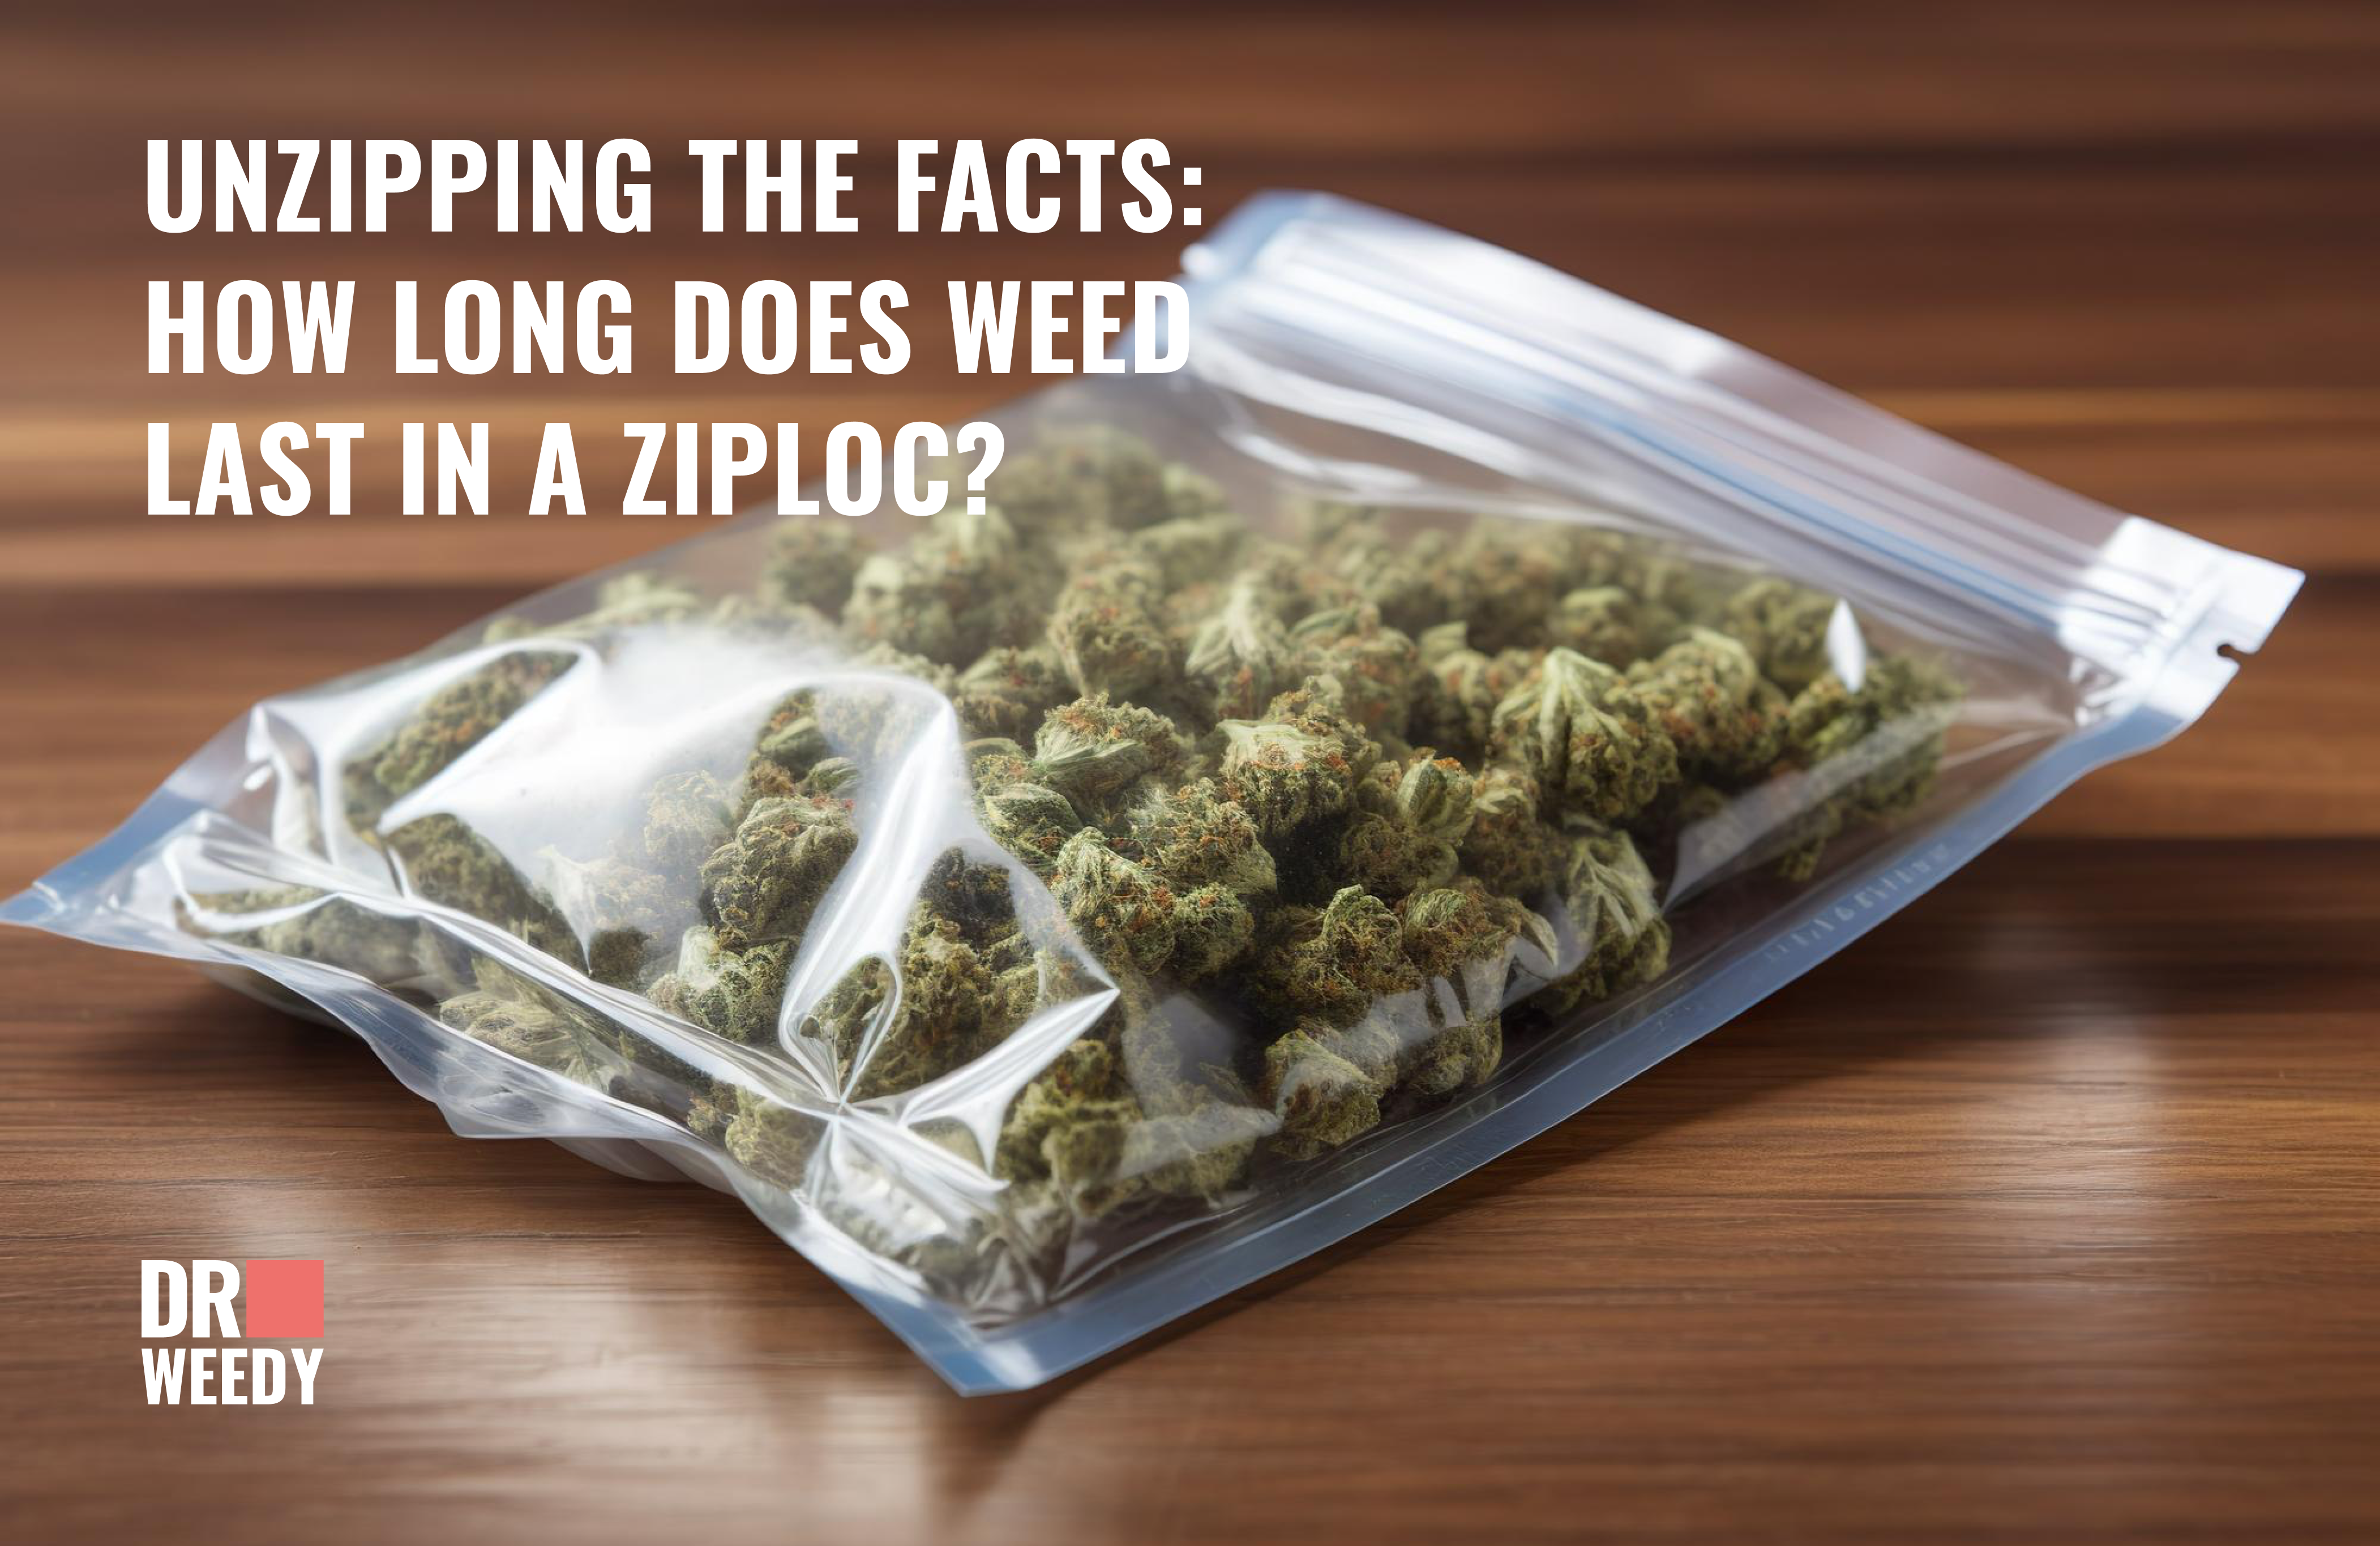 How Long Does Weed Last in a Ziploc?